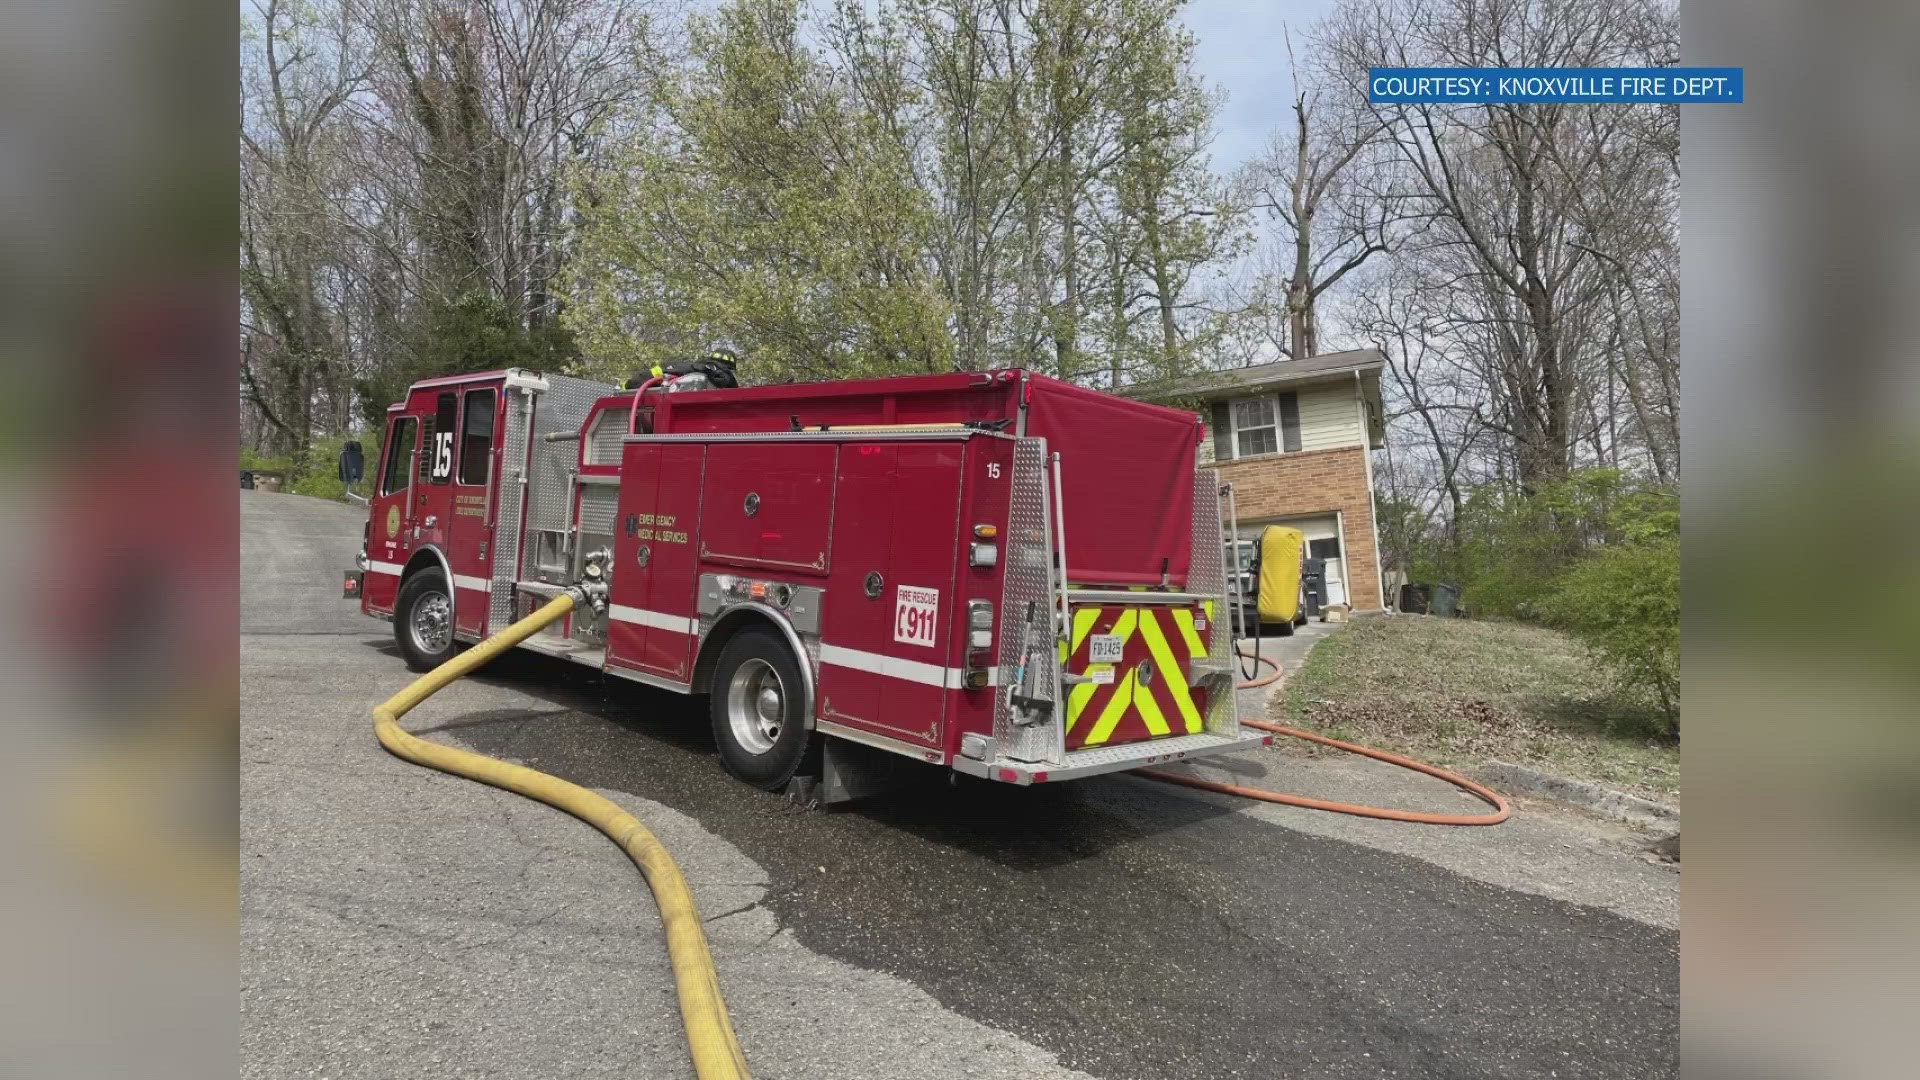 The Knoxville Fire Department responded to a call about smoke coming from a house on NOrthcrest Circle. After searching the house, a body was found.